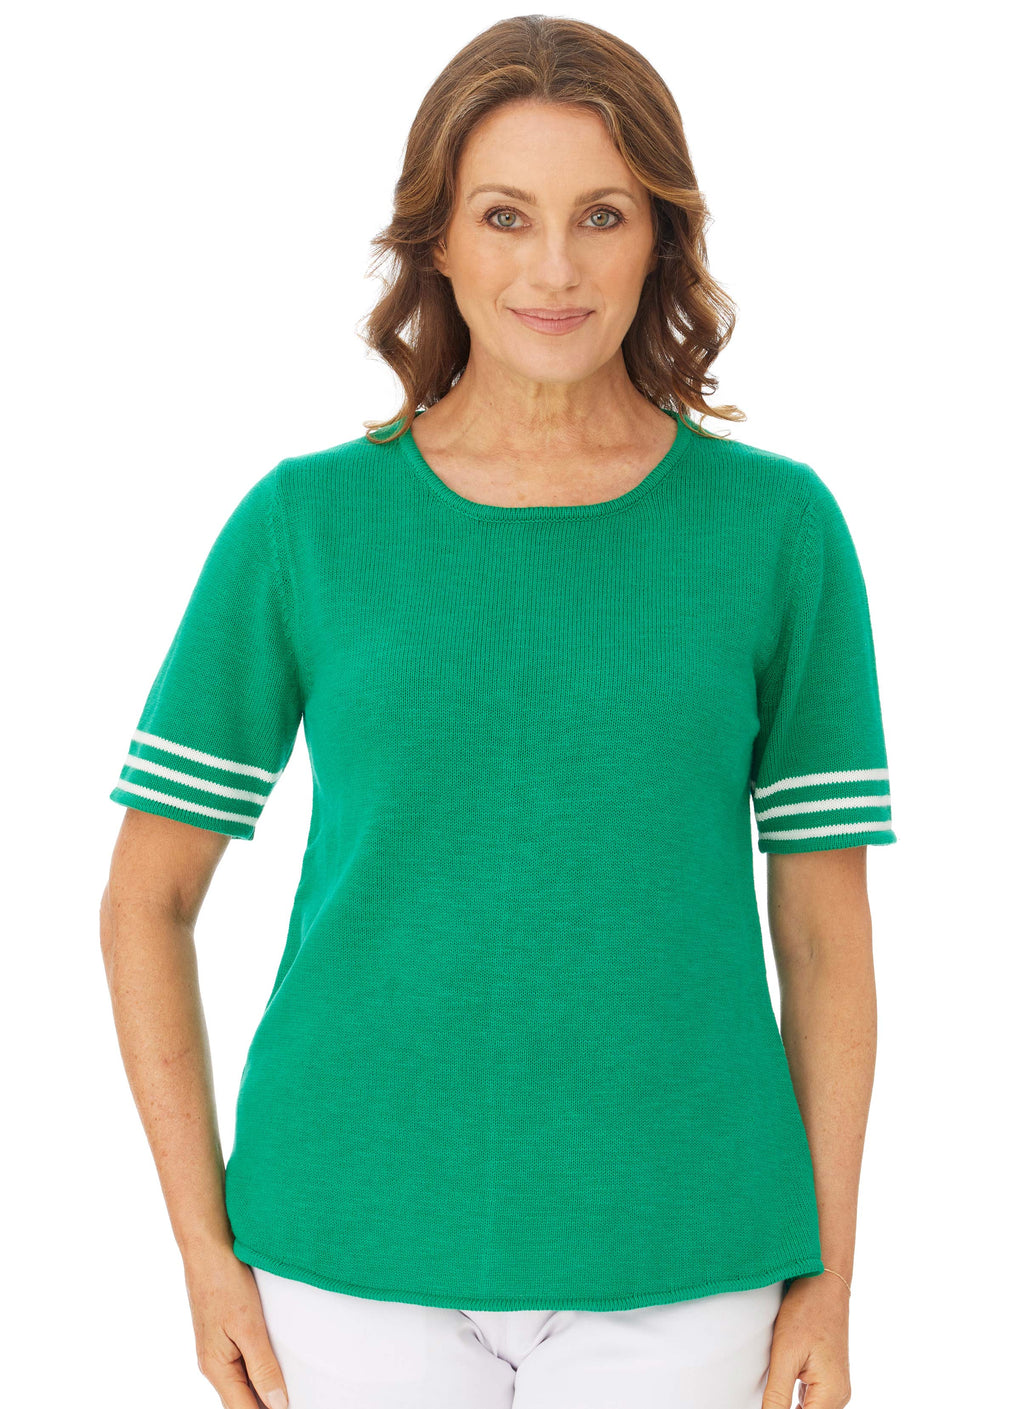 CARDWELL STRIPED S/S TEE WITH BACK SEAM - EMERALD